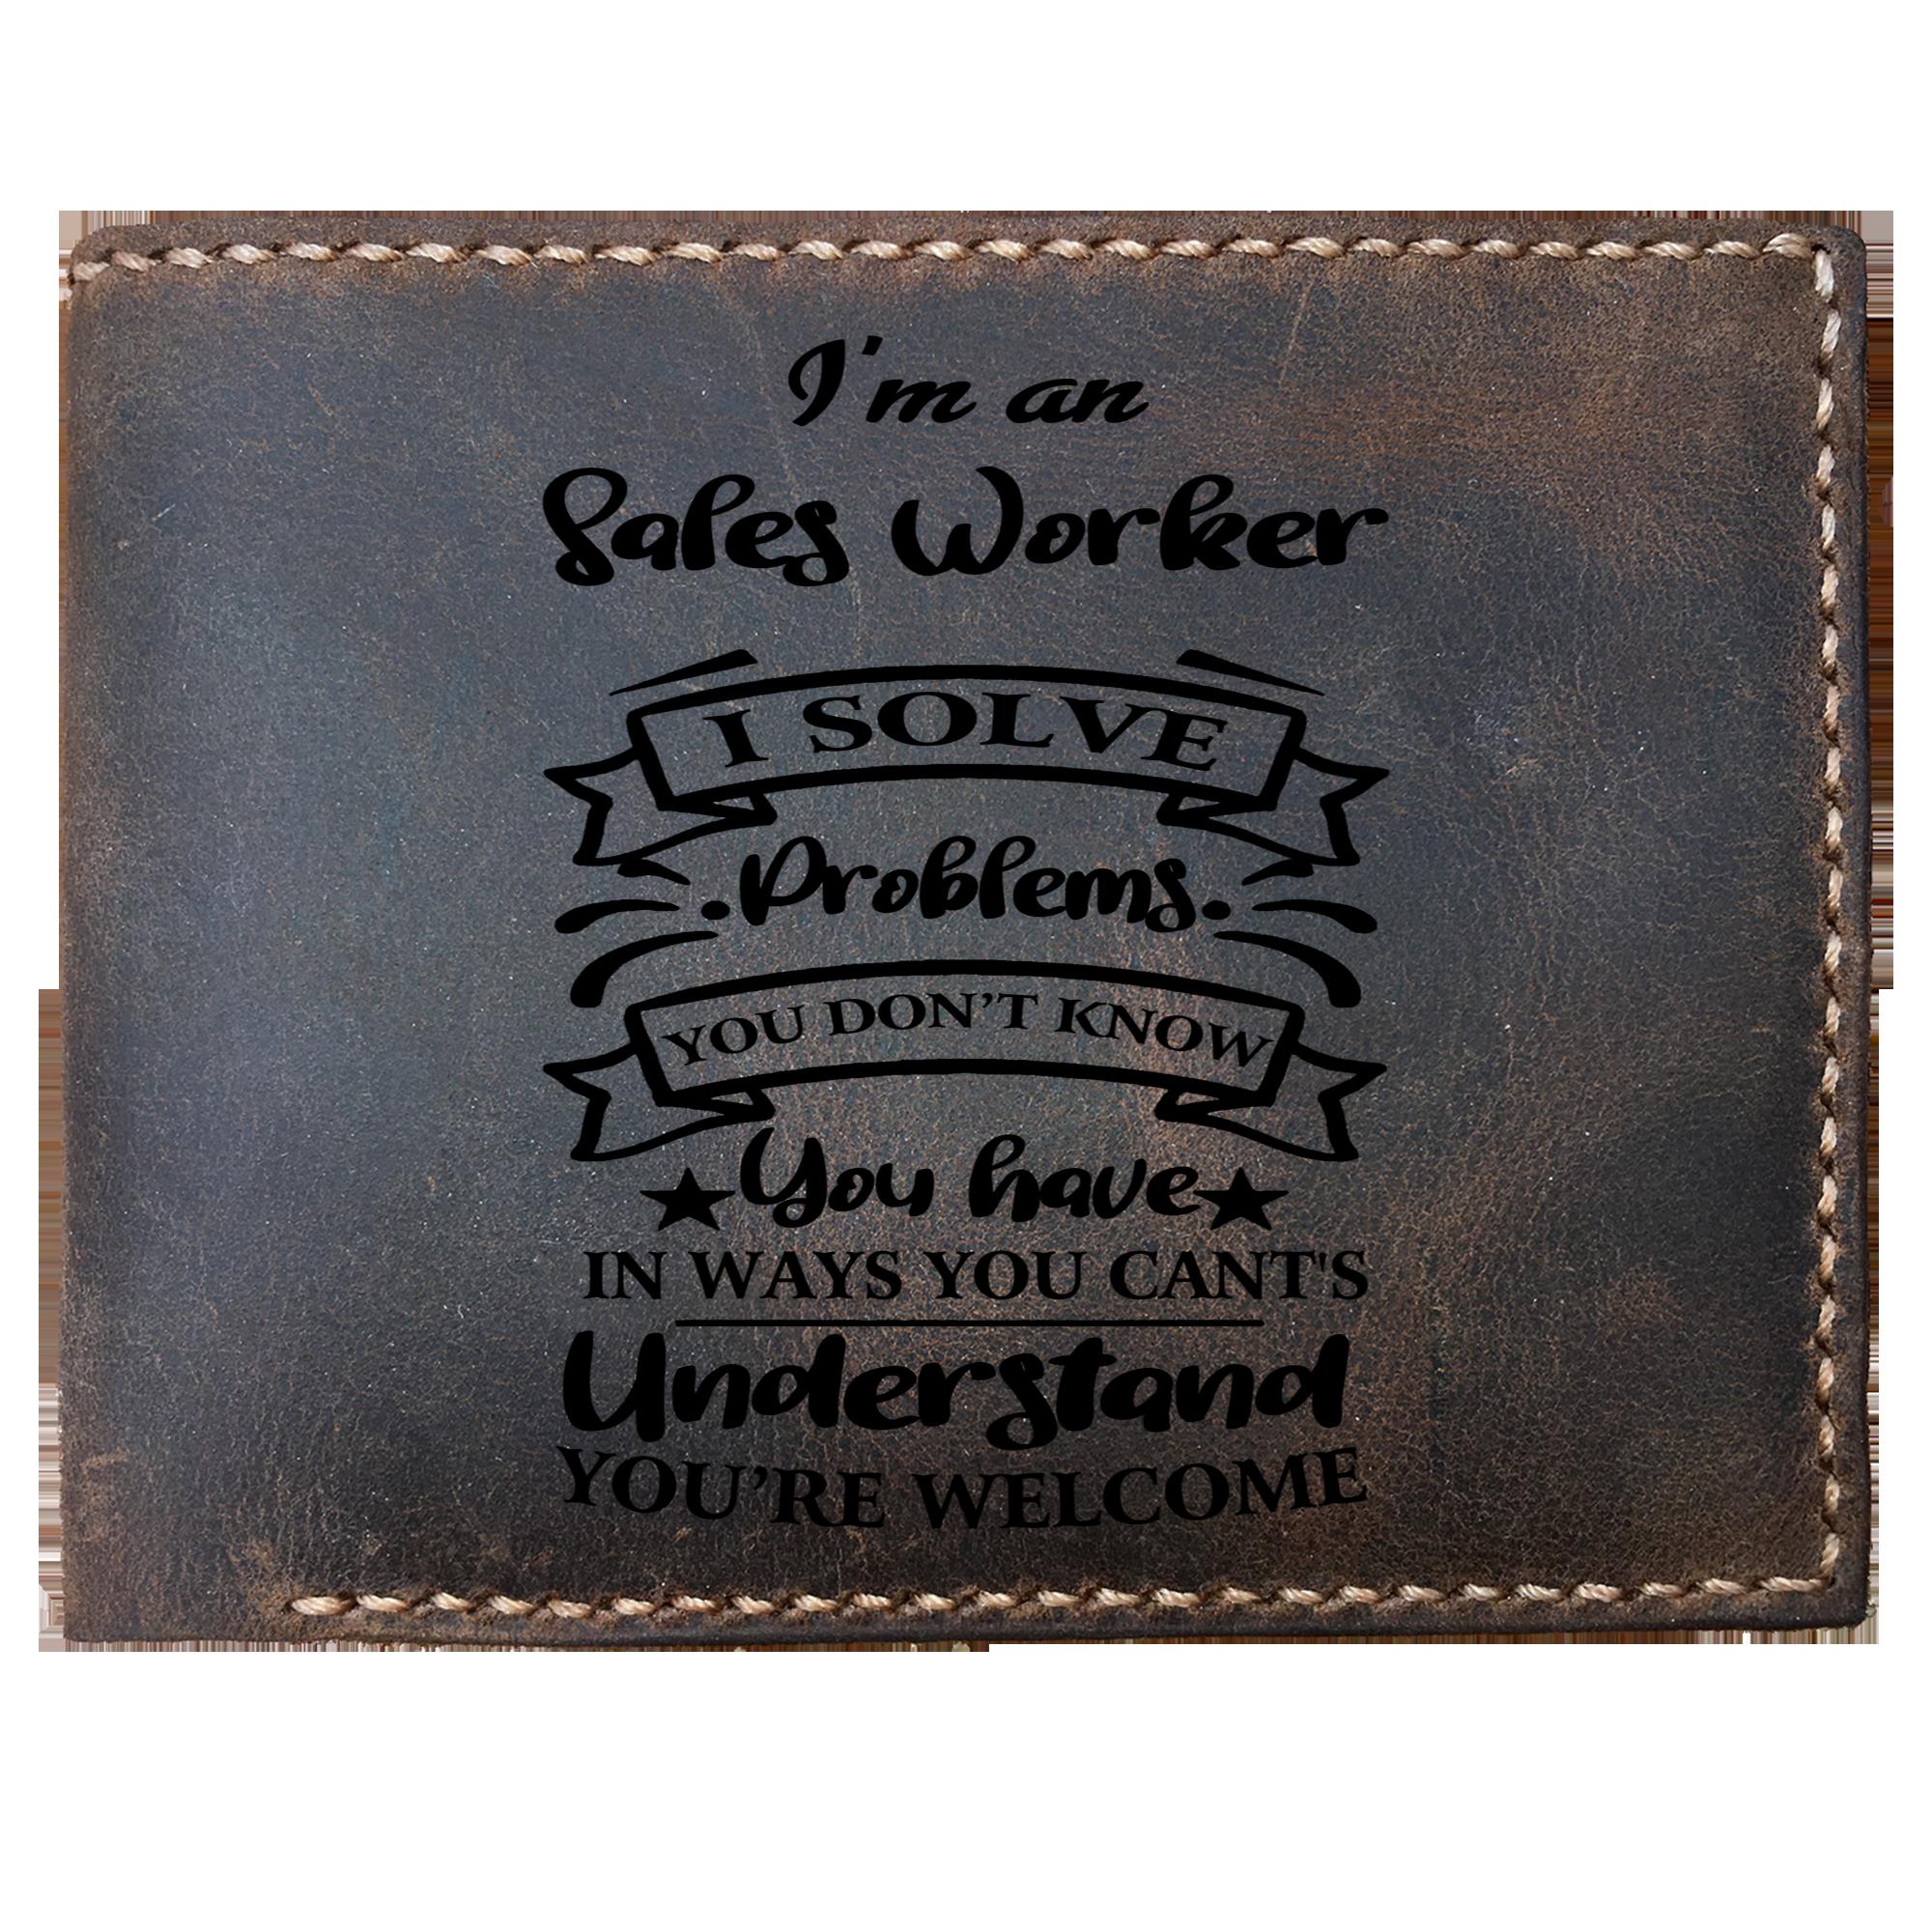 Skitongifts Funny Custom Laser Engraved Bifold Leather Wallet For Men, I'm an Sales Worker Solve Problems, Father's Day Gifts